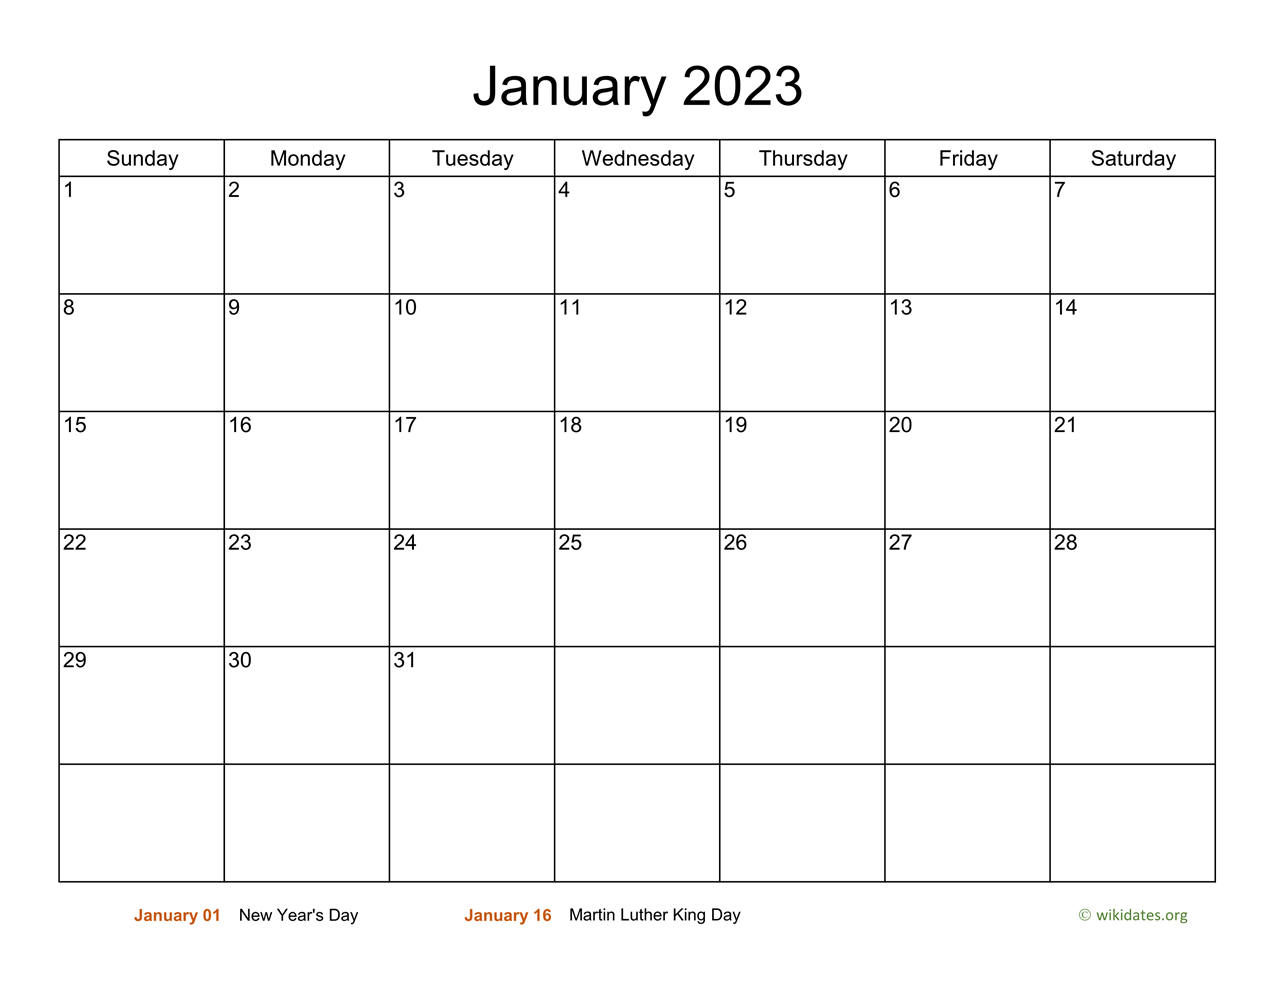 monthly-basic-calendar-for-2023-wikidates